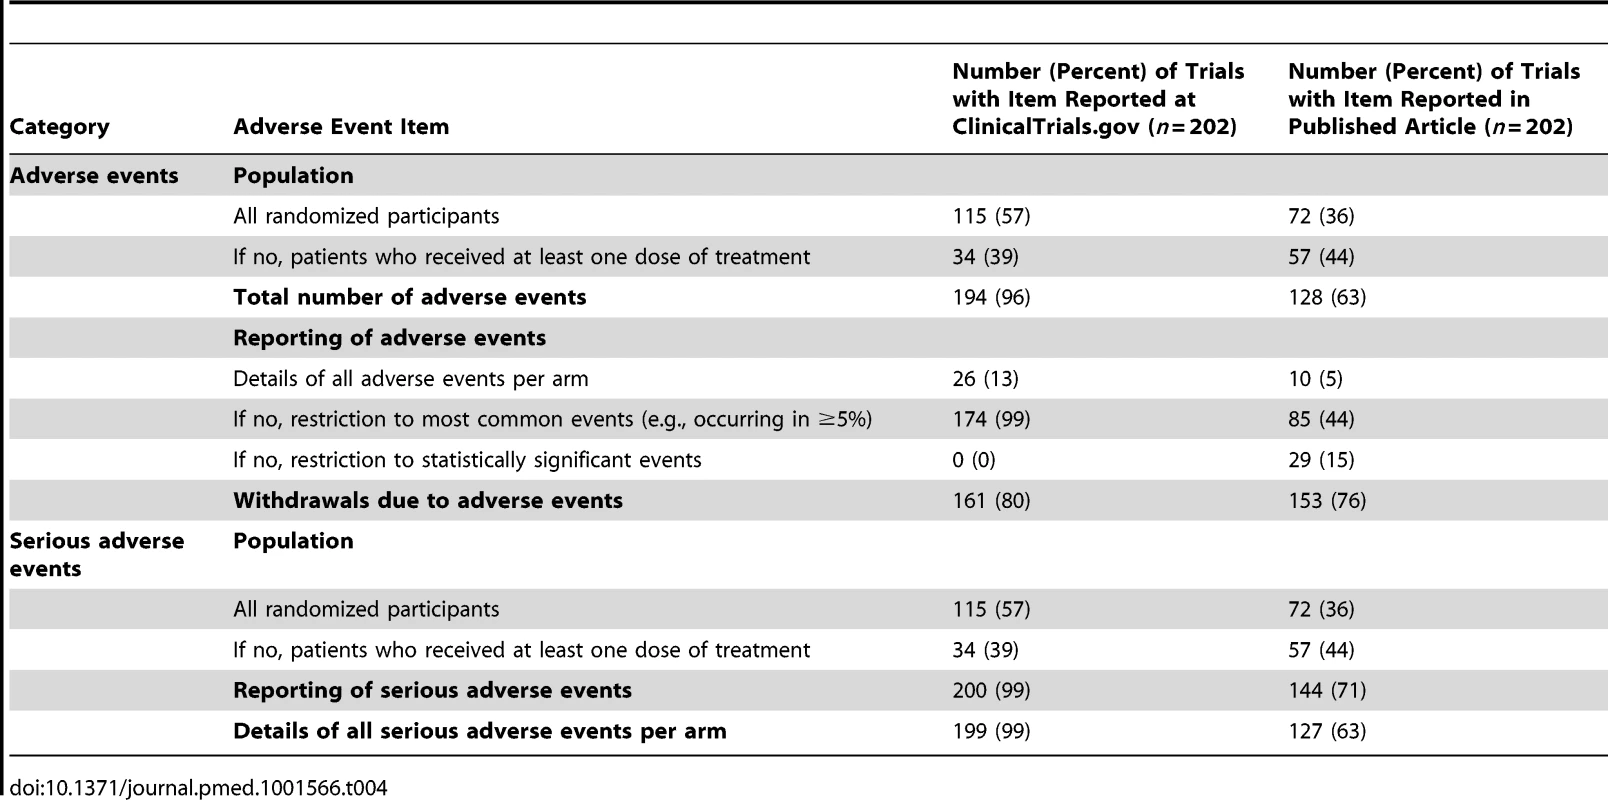 Reporting of adverse events at ClinicalTrials.gov and in published articles.